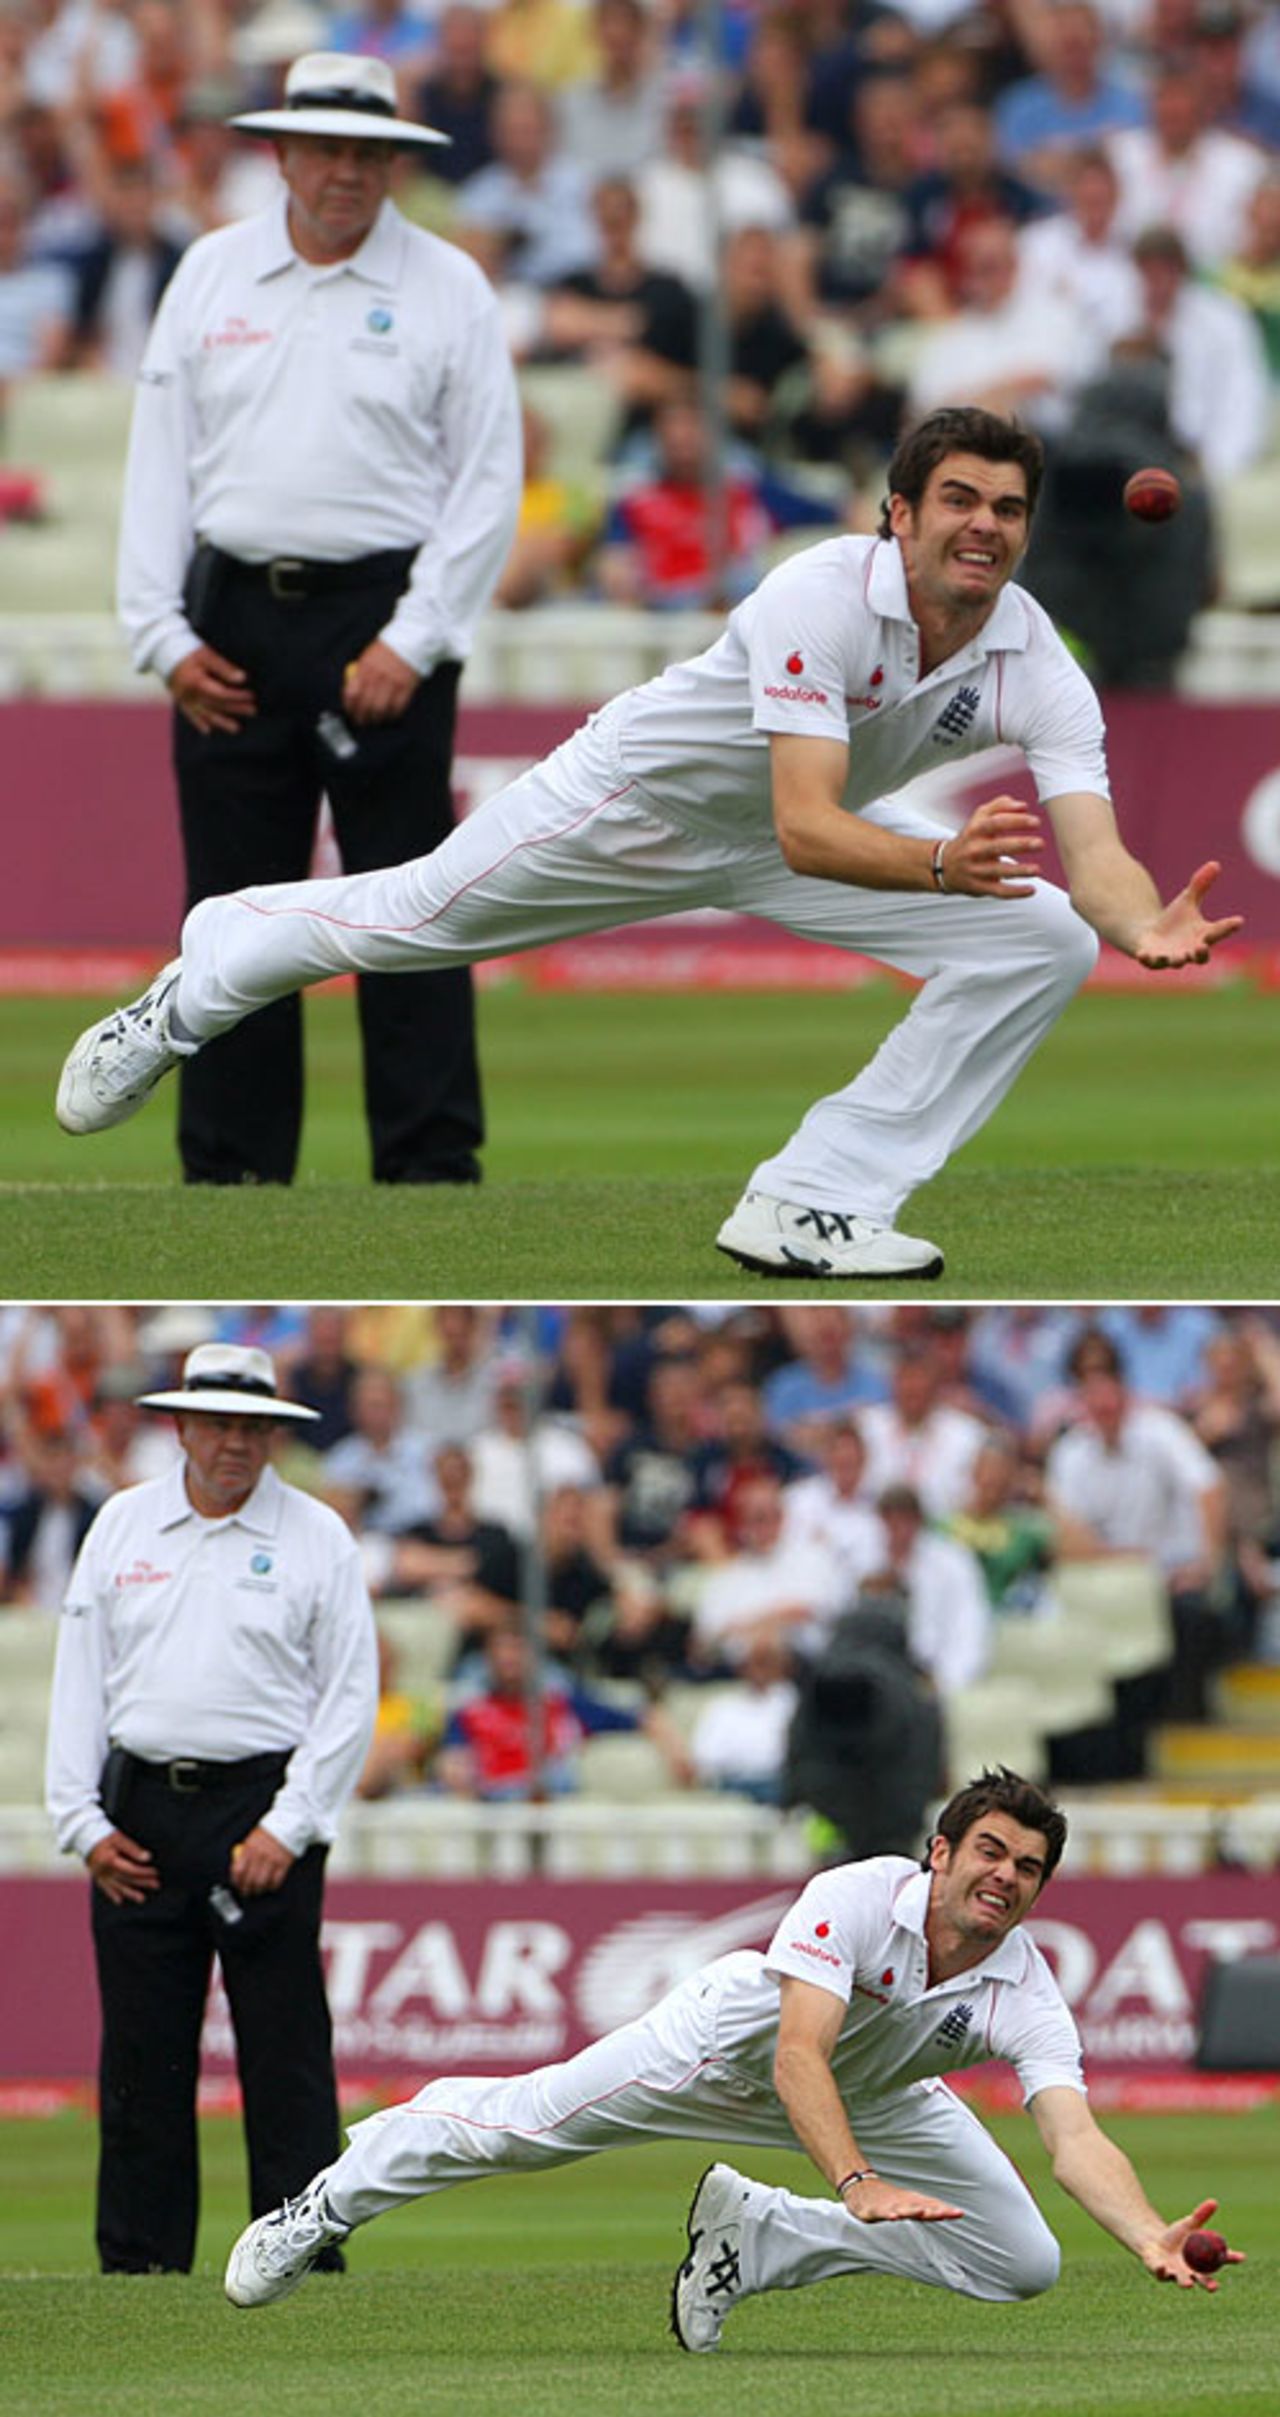 James Anderson takes an outstanding one-handed catch off his own bowling, England v South Africa, 1st Test, Edgbaston, July 31, 2008